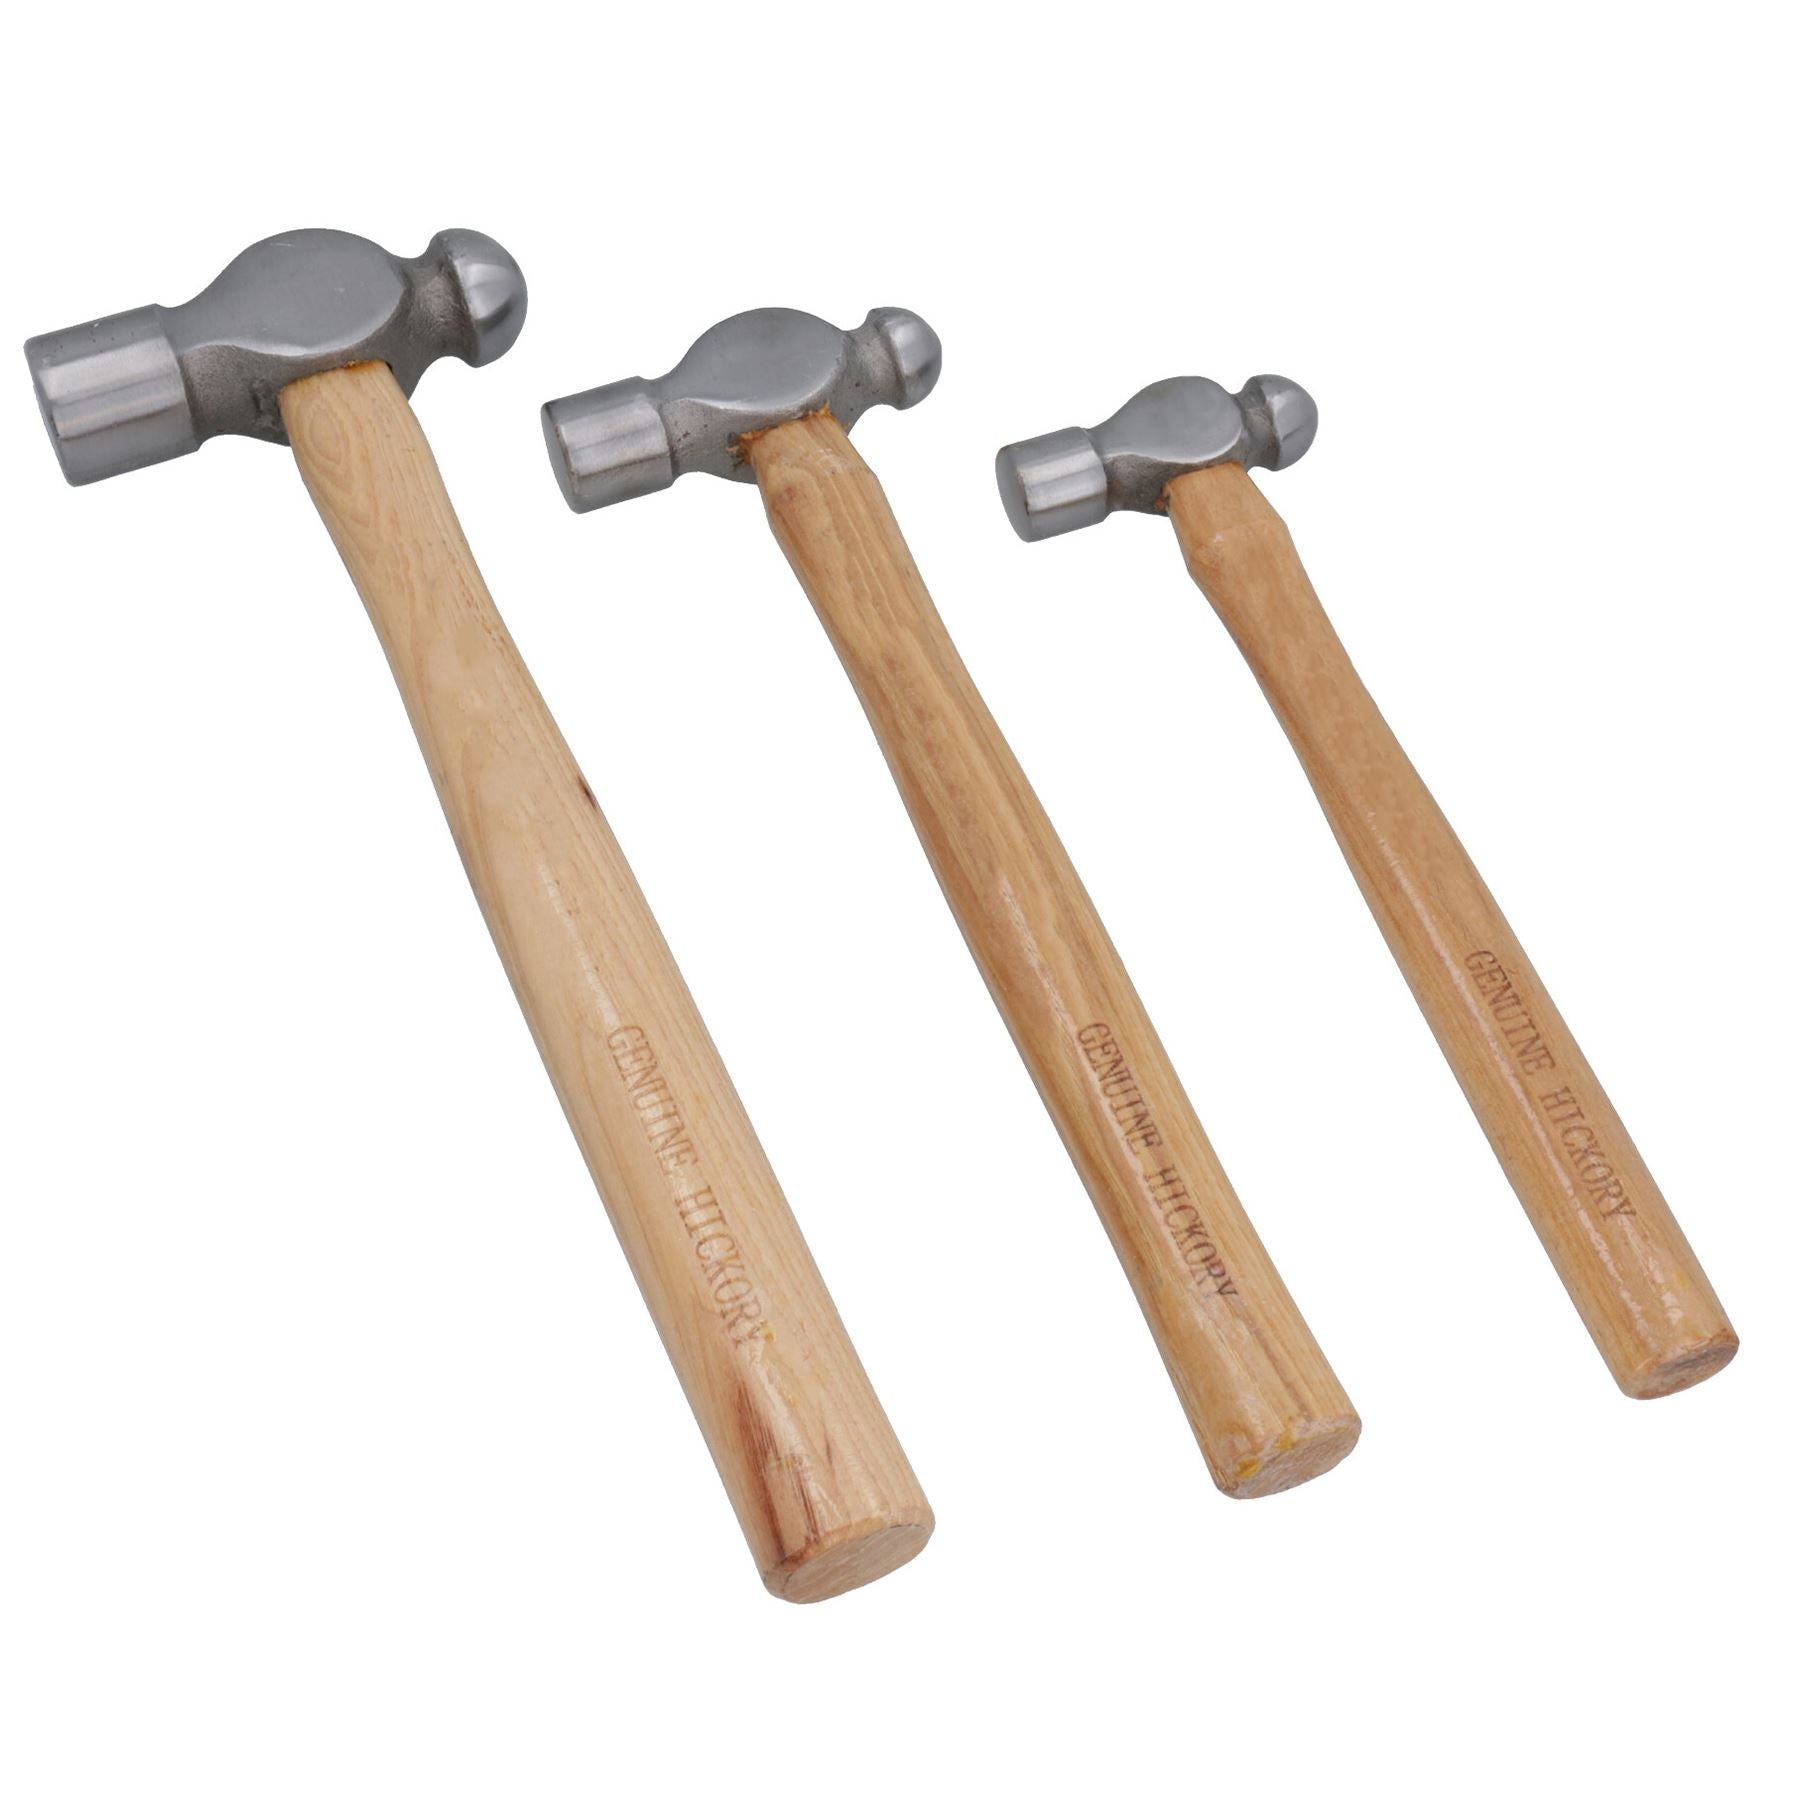 3pc Ball Pein Hammer Professional Set by BERGEN AT205